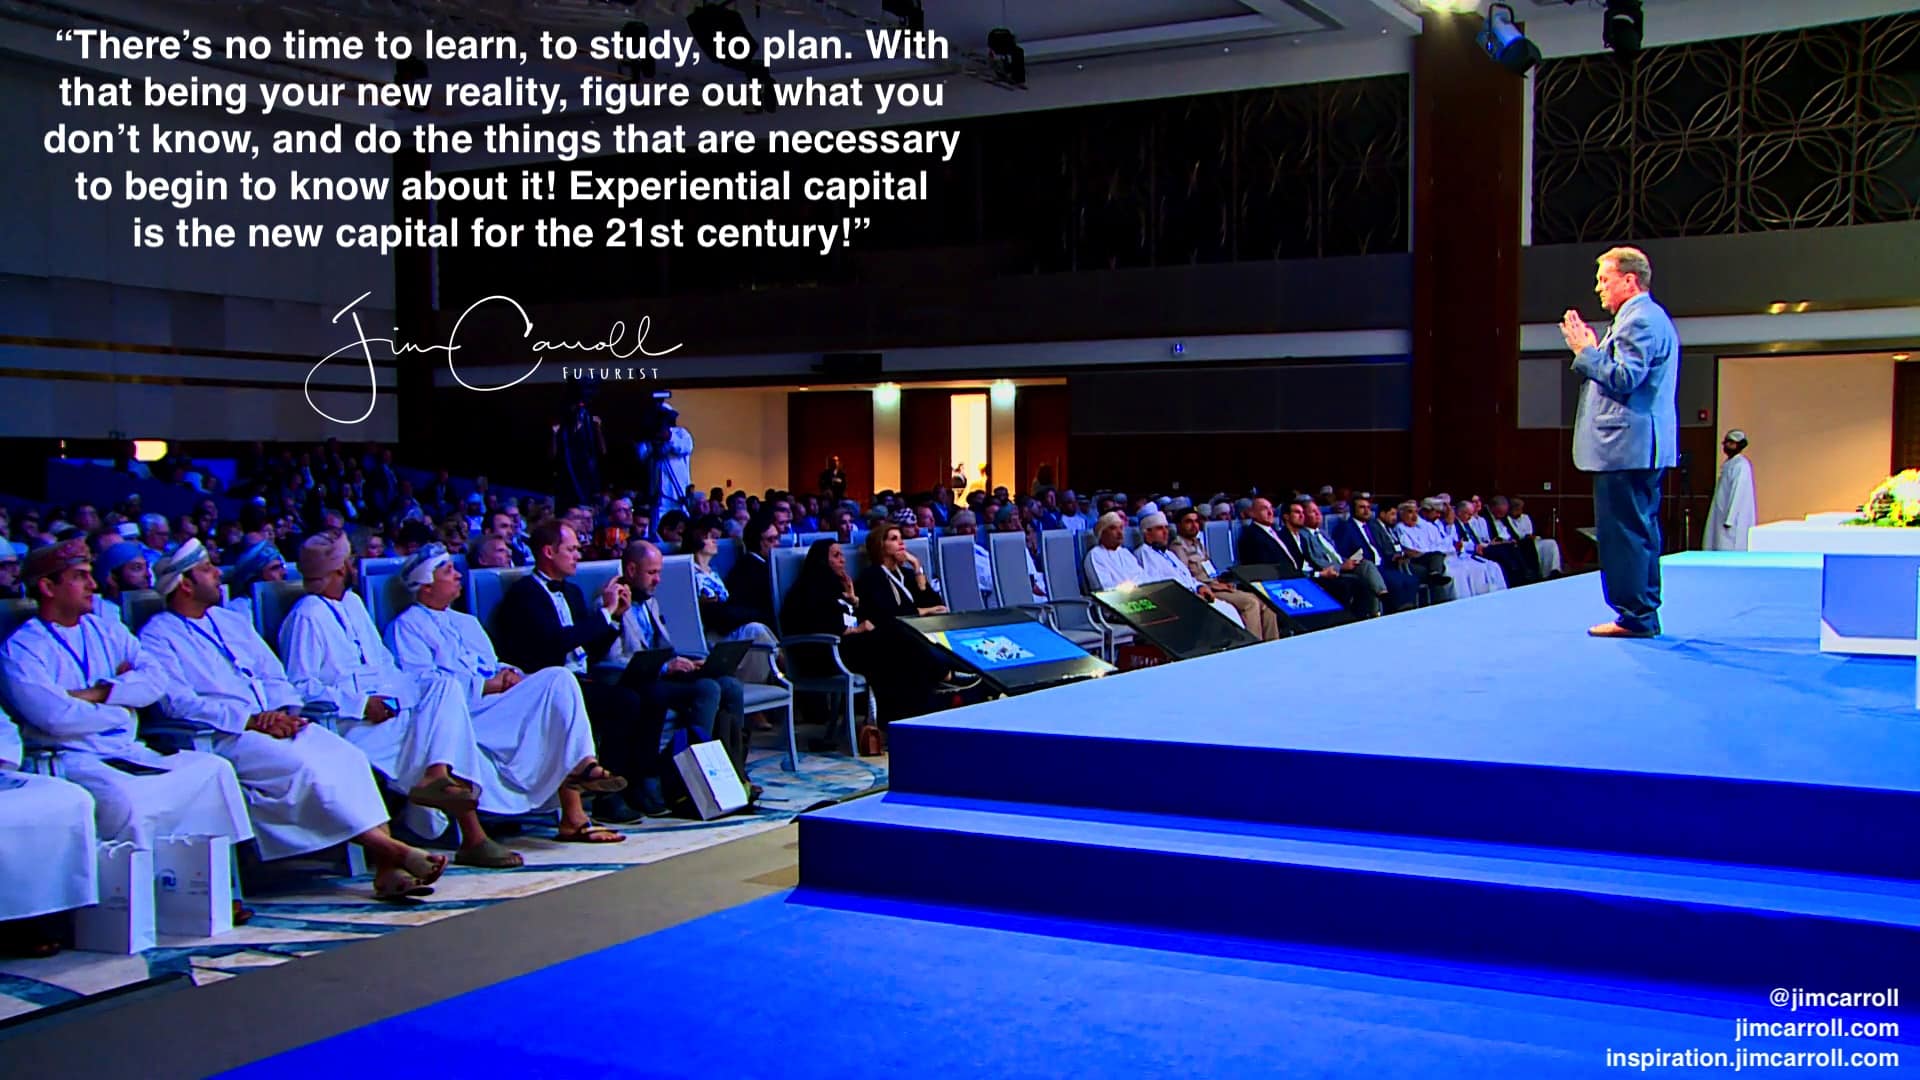 Daily Inspiration: "....Experiential capital is the new capital for the 21st century!”